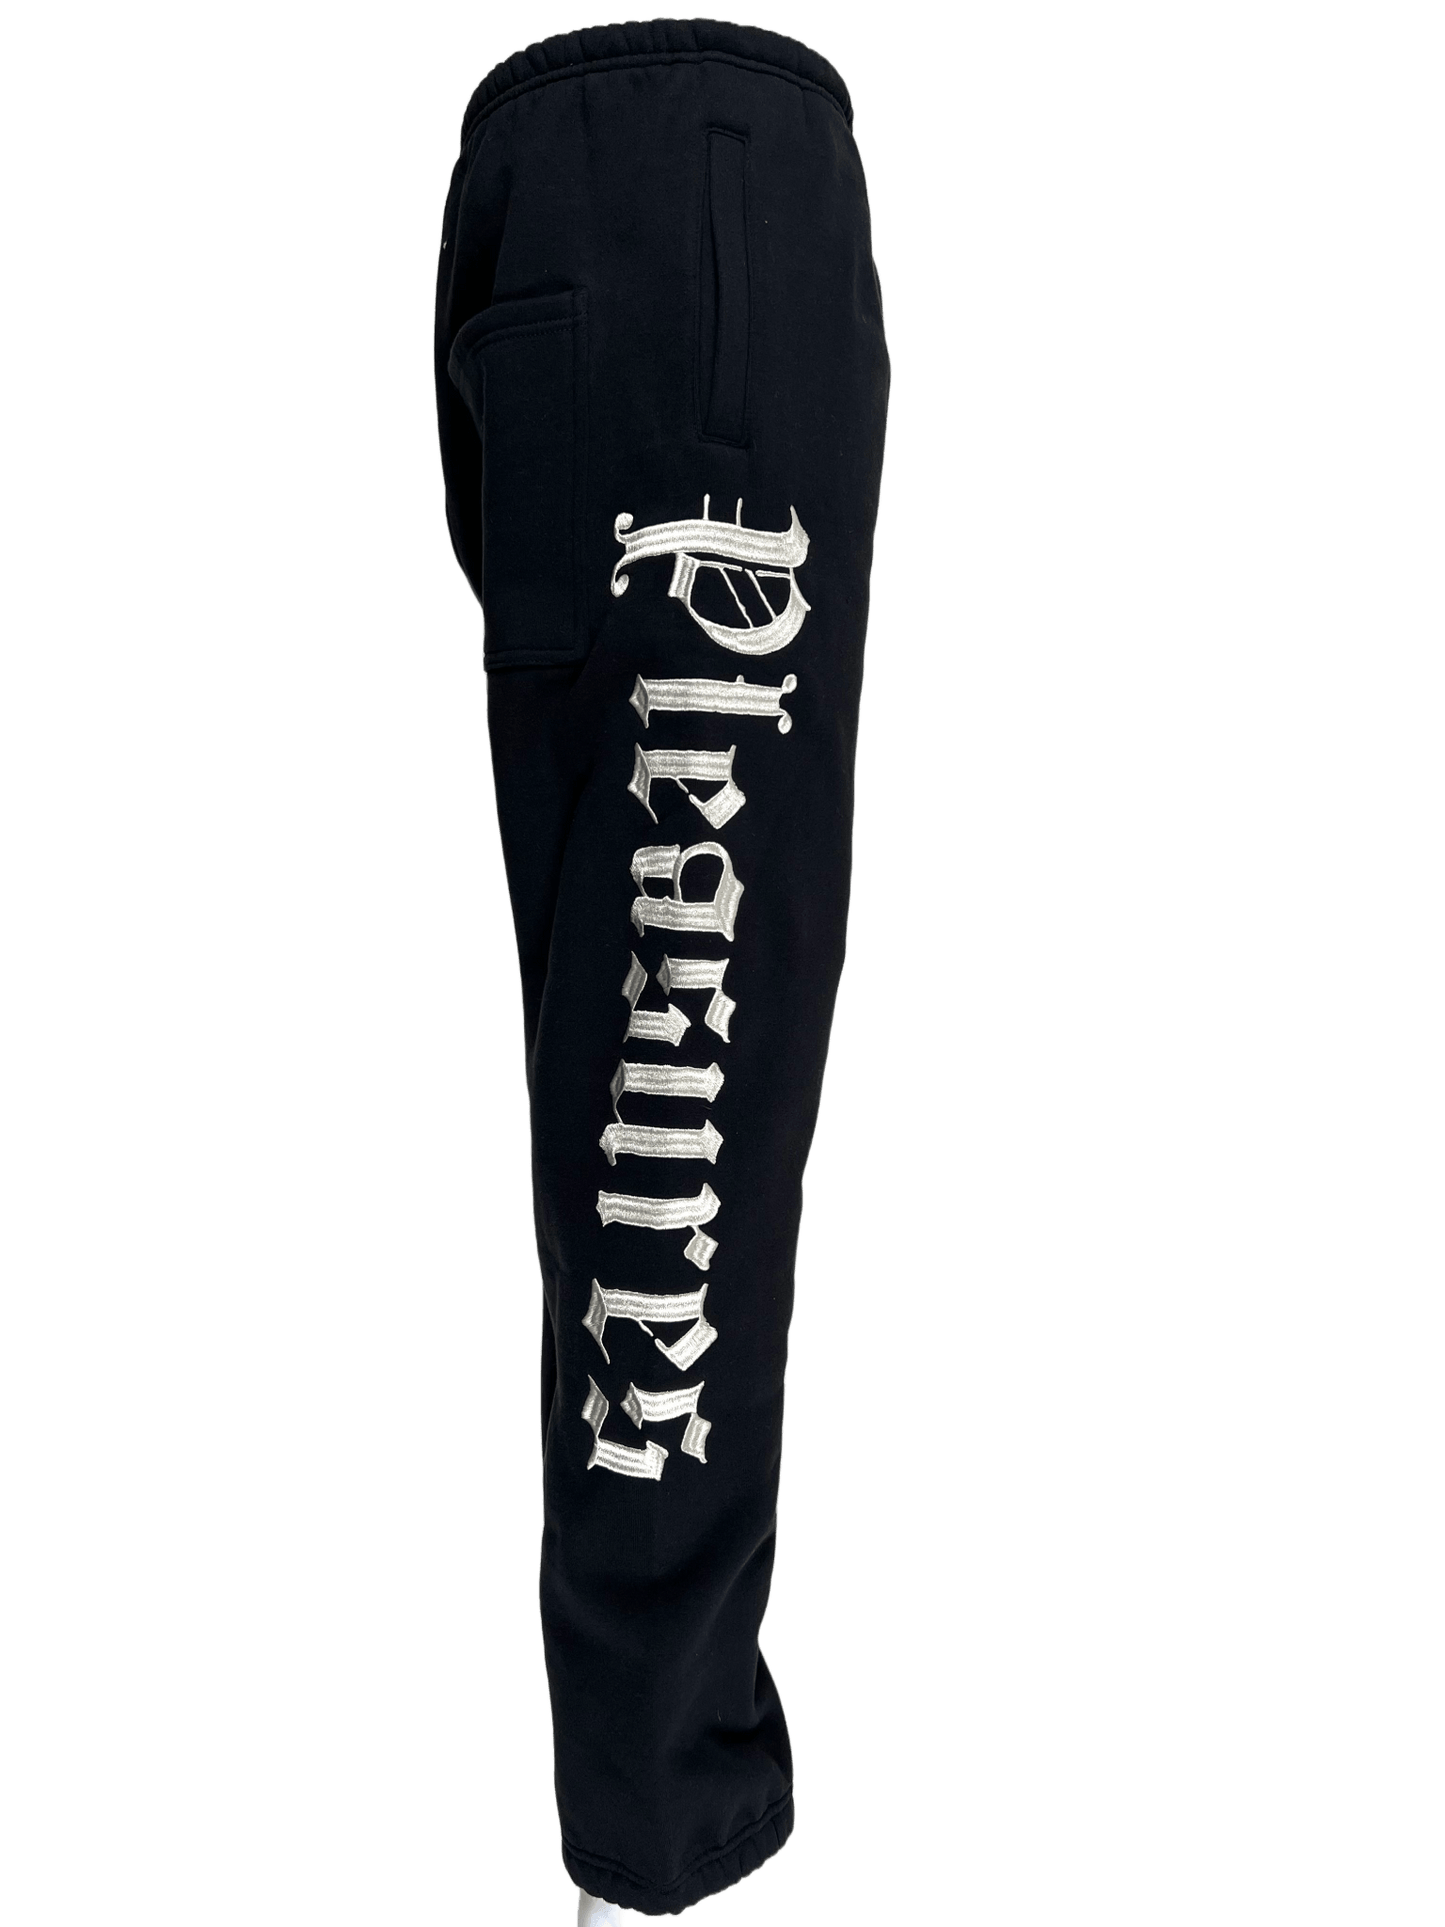 A black cotton fleece sweatpants with a white logo print on it can be replaced with "PLEASURES BURNOUT SWEATPANTS BLACK by PLEASURES".